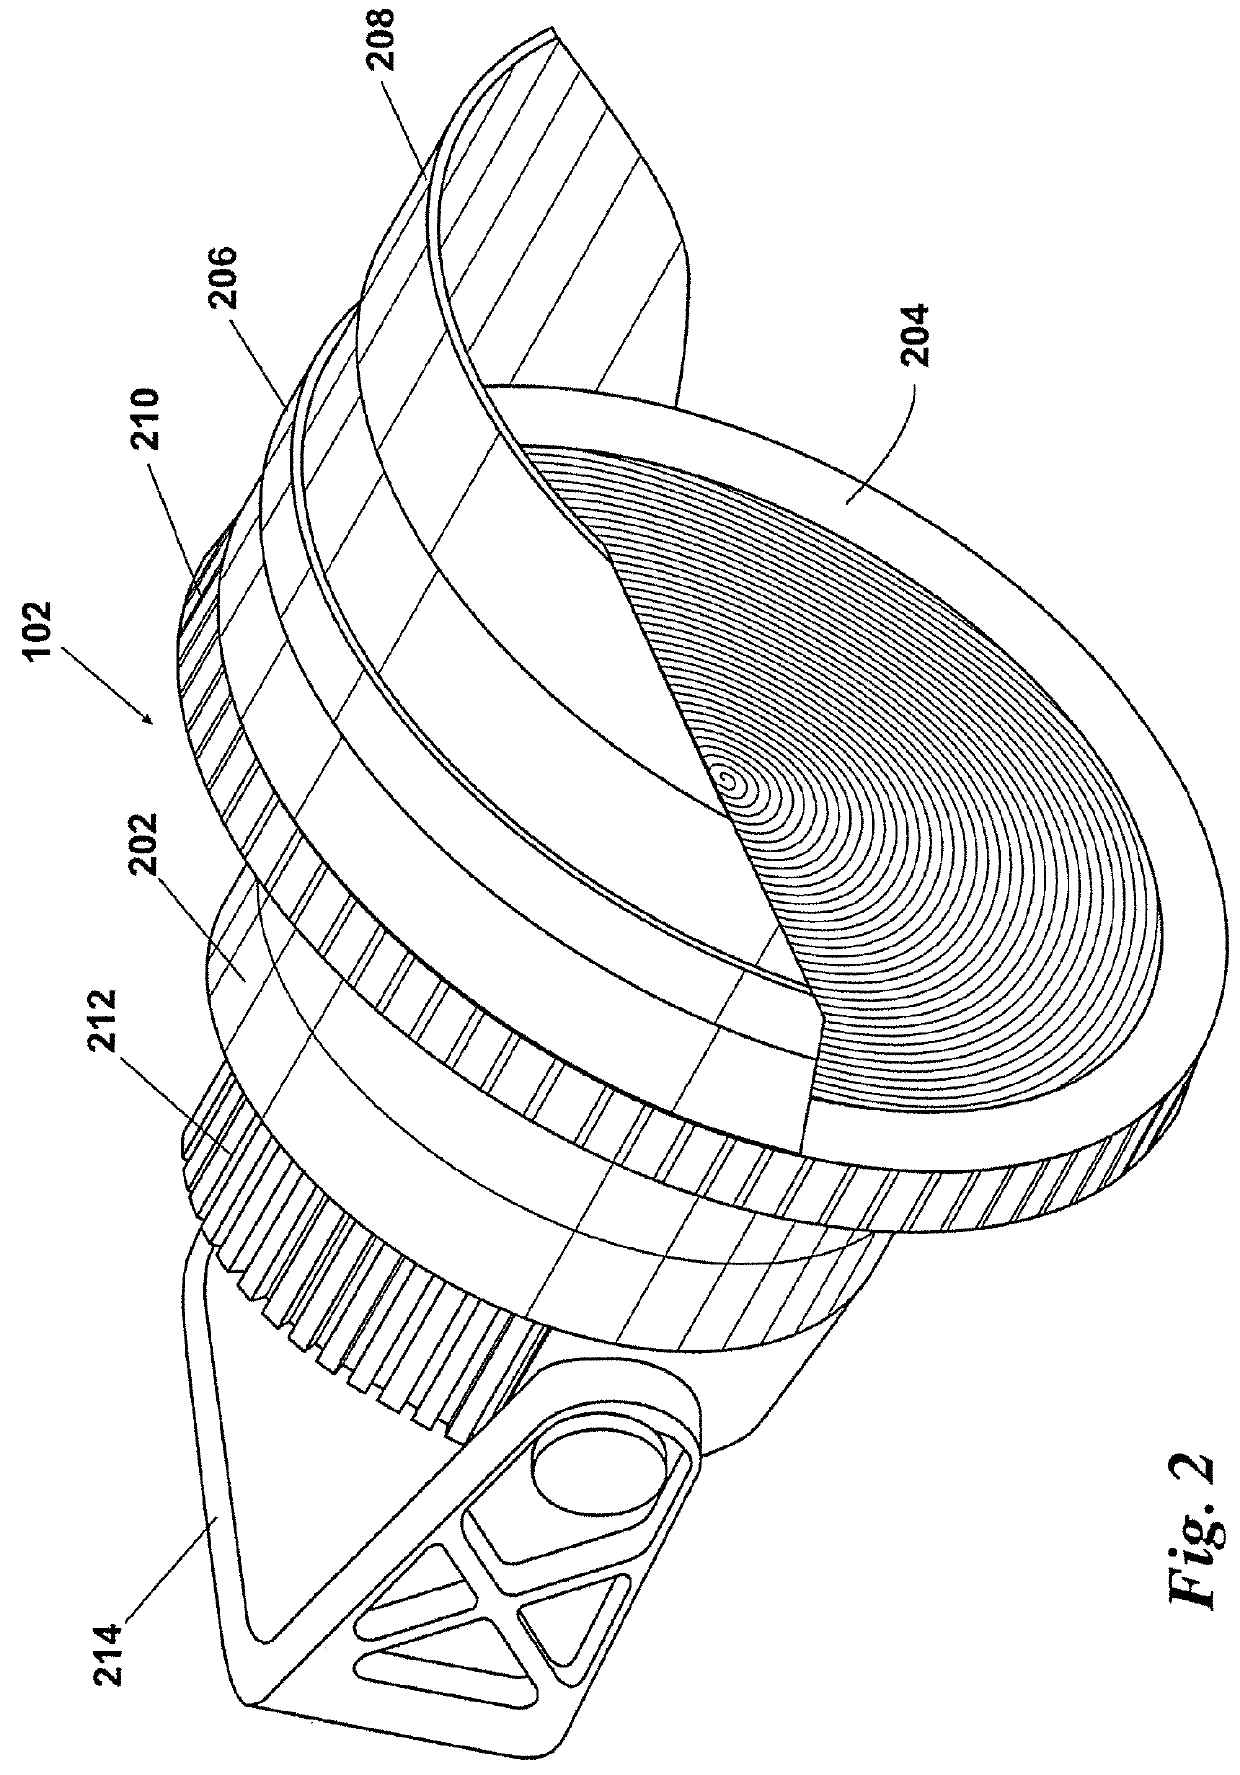 LED venue lighting system with first and second housing having an air passage therebetween